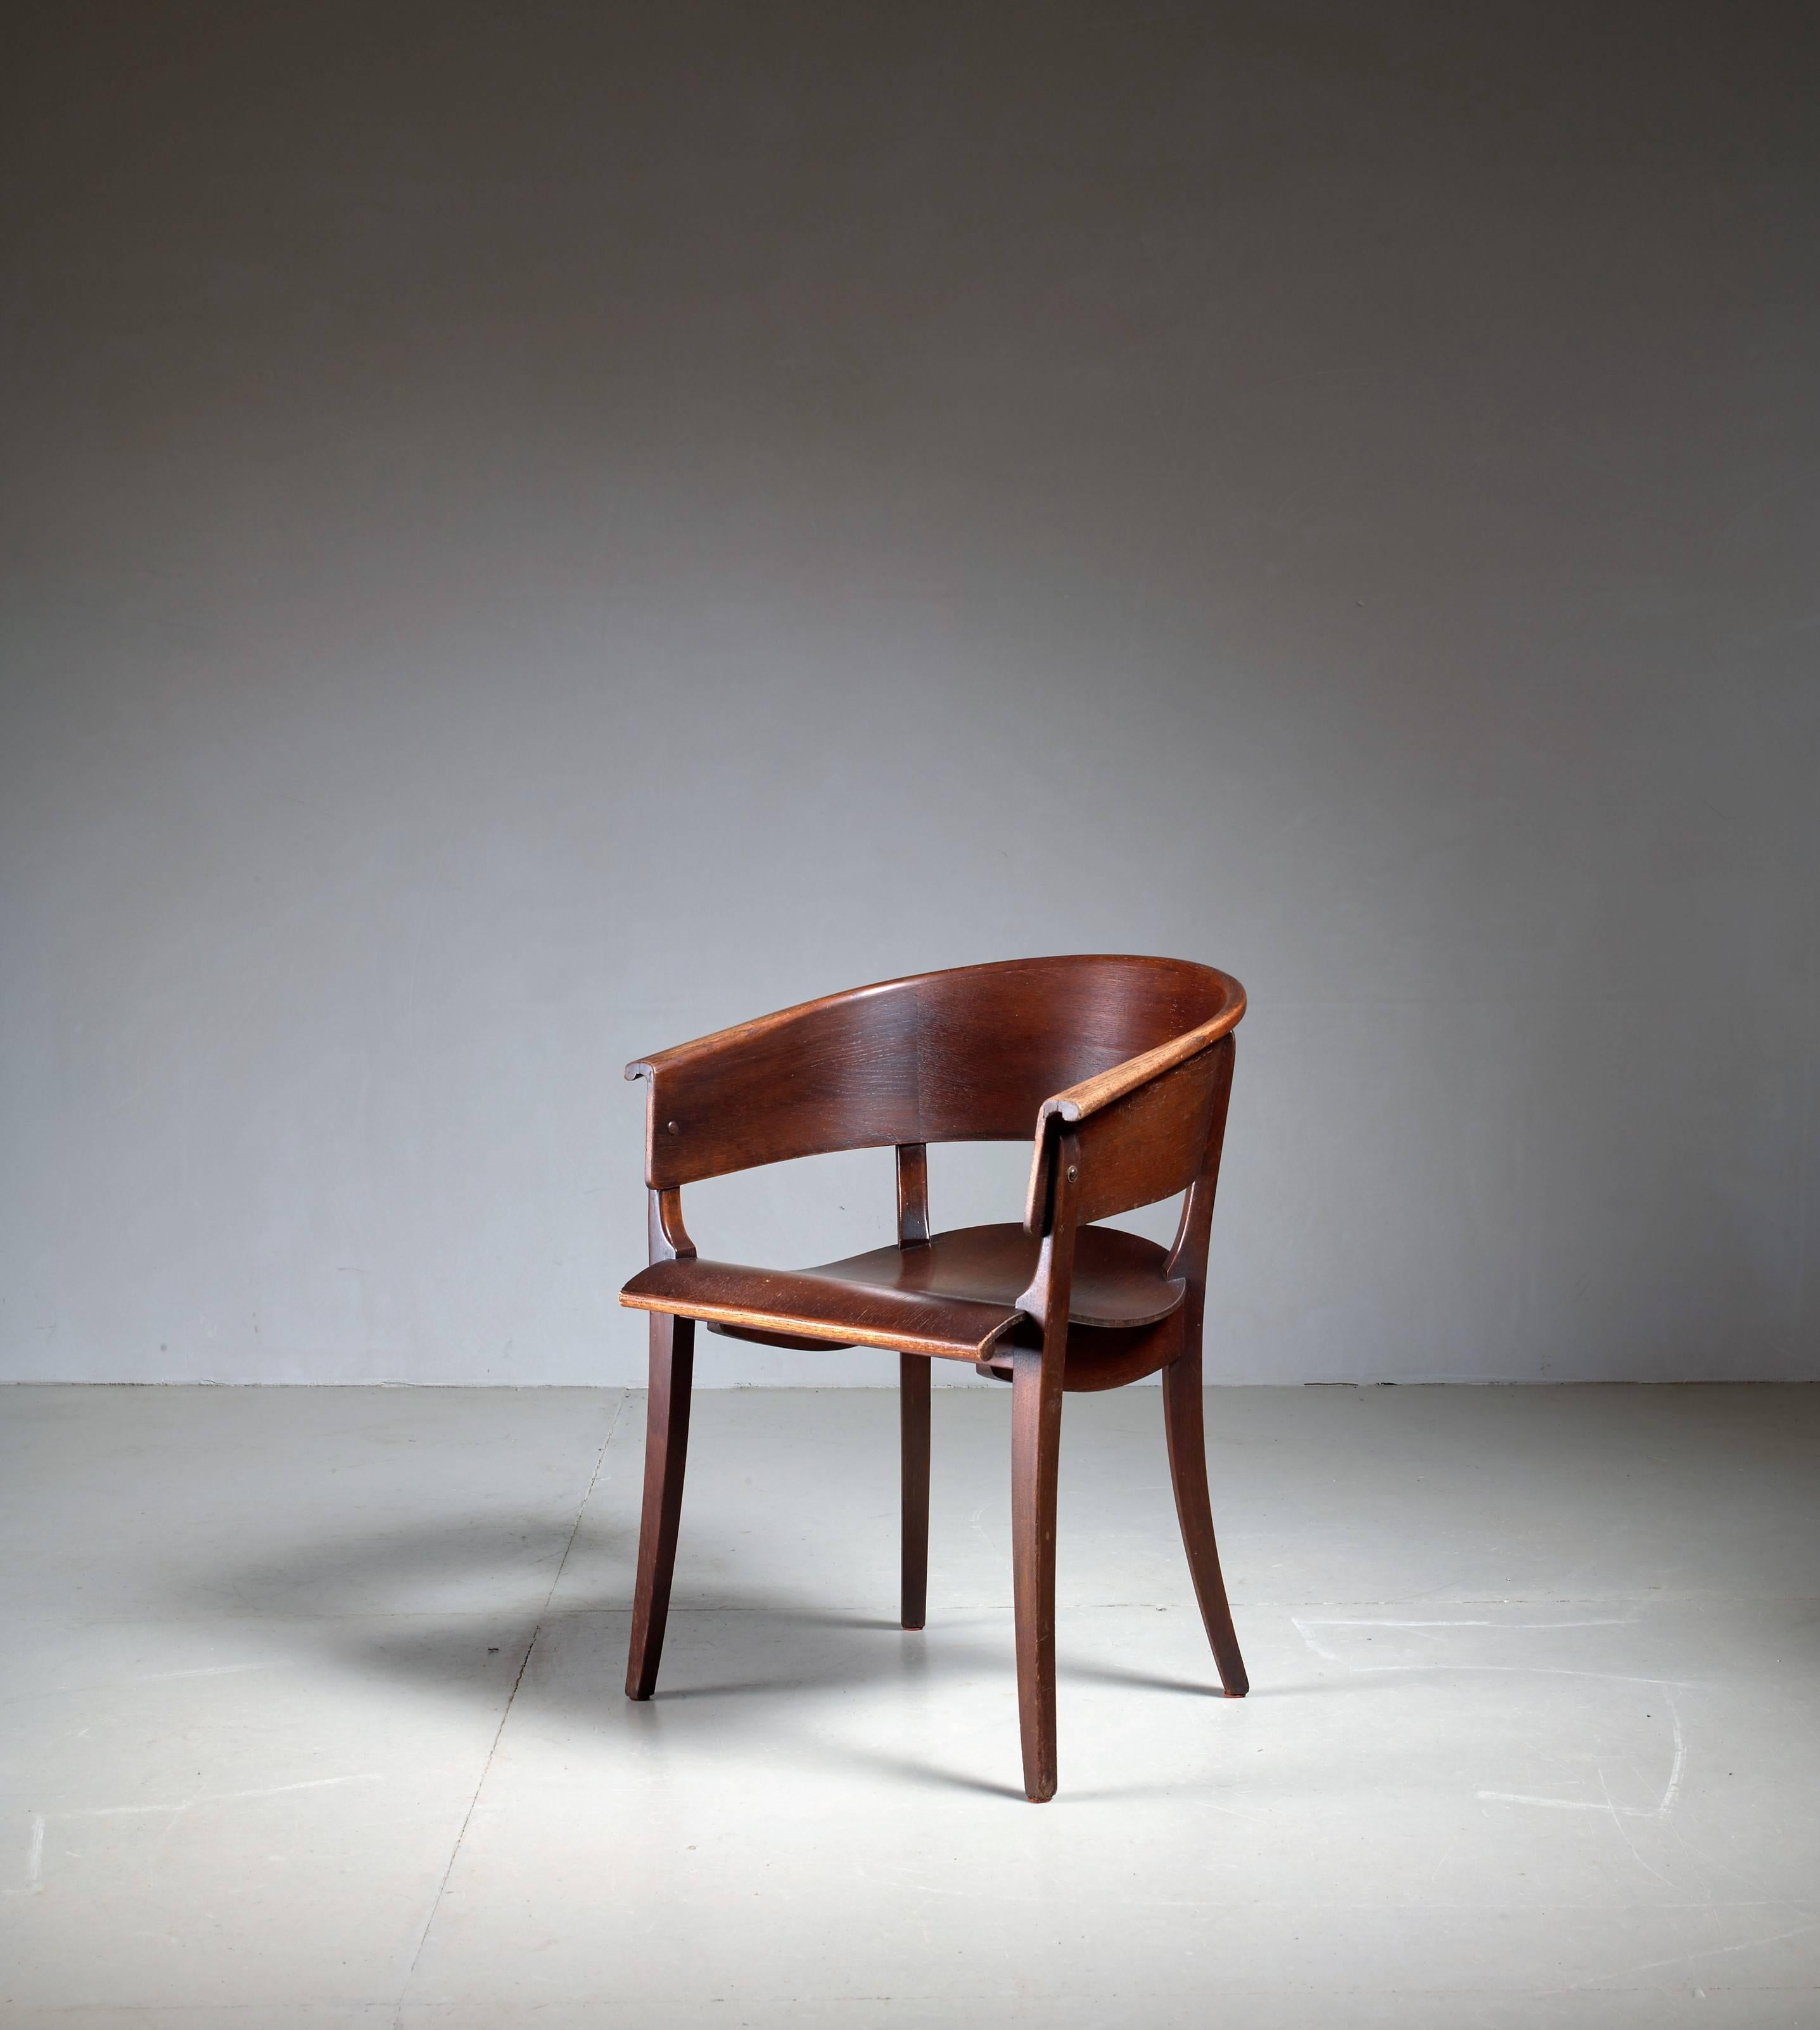 Early 20th Century Ernst Rockhausen Bauhaus Style Plywood and Oak Chair, Germany, circa 1928 For Sale